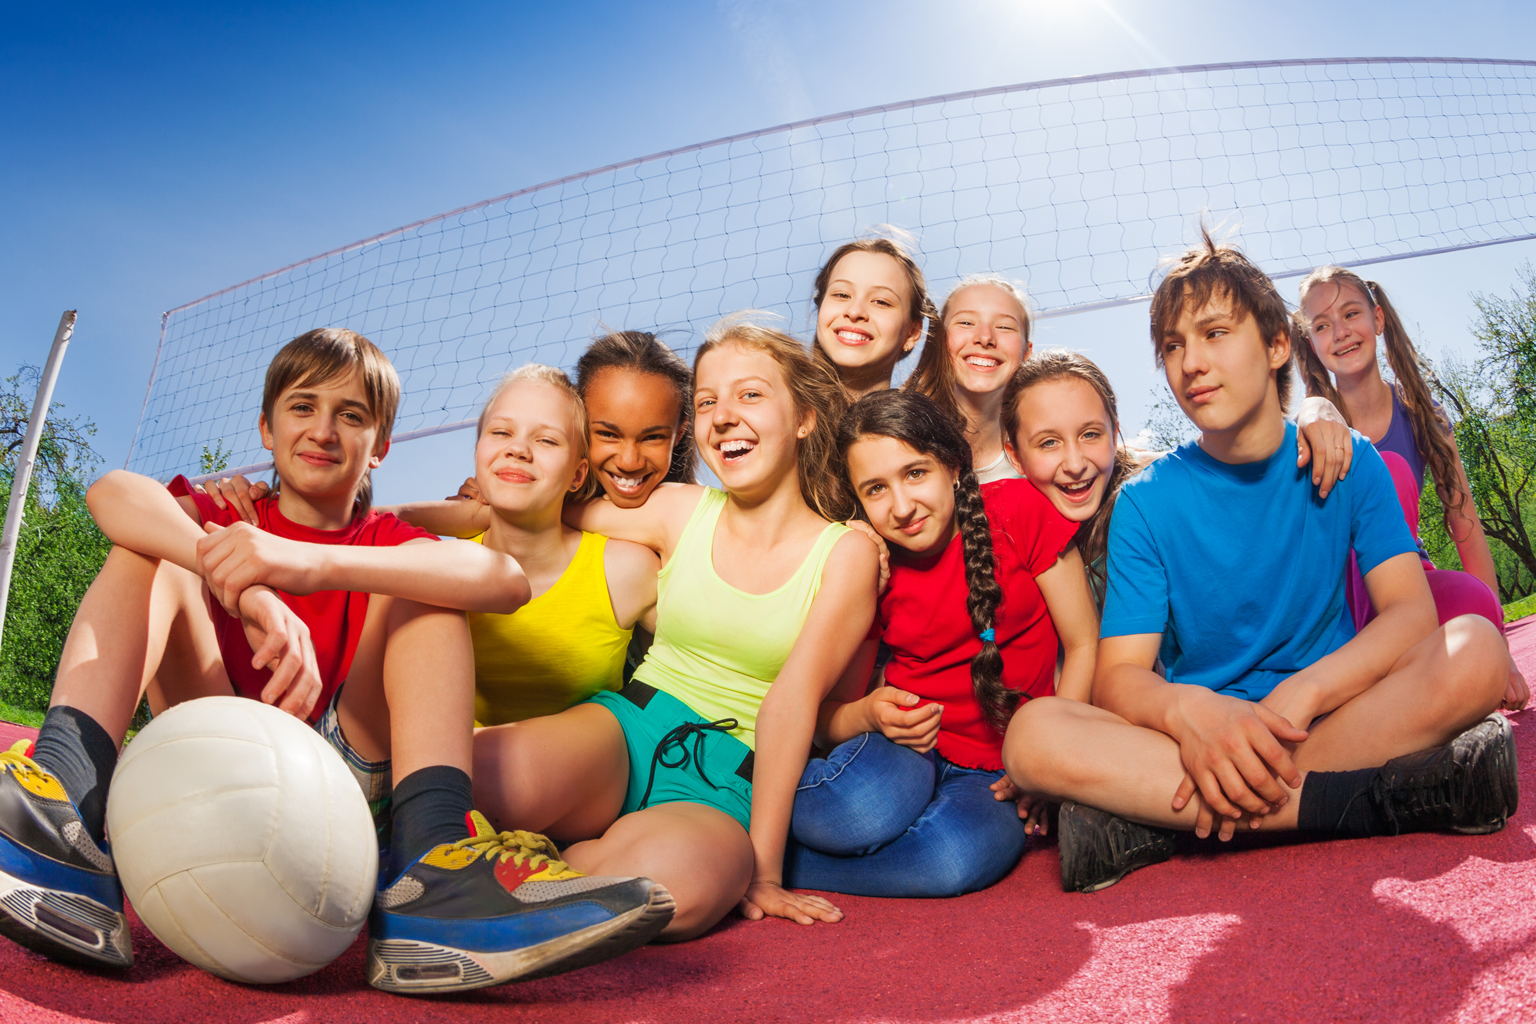 A group of teenage children sitting huddled together smiling with a volleyball, in front of a net.